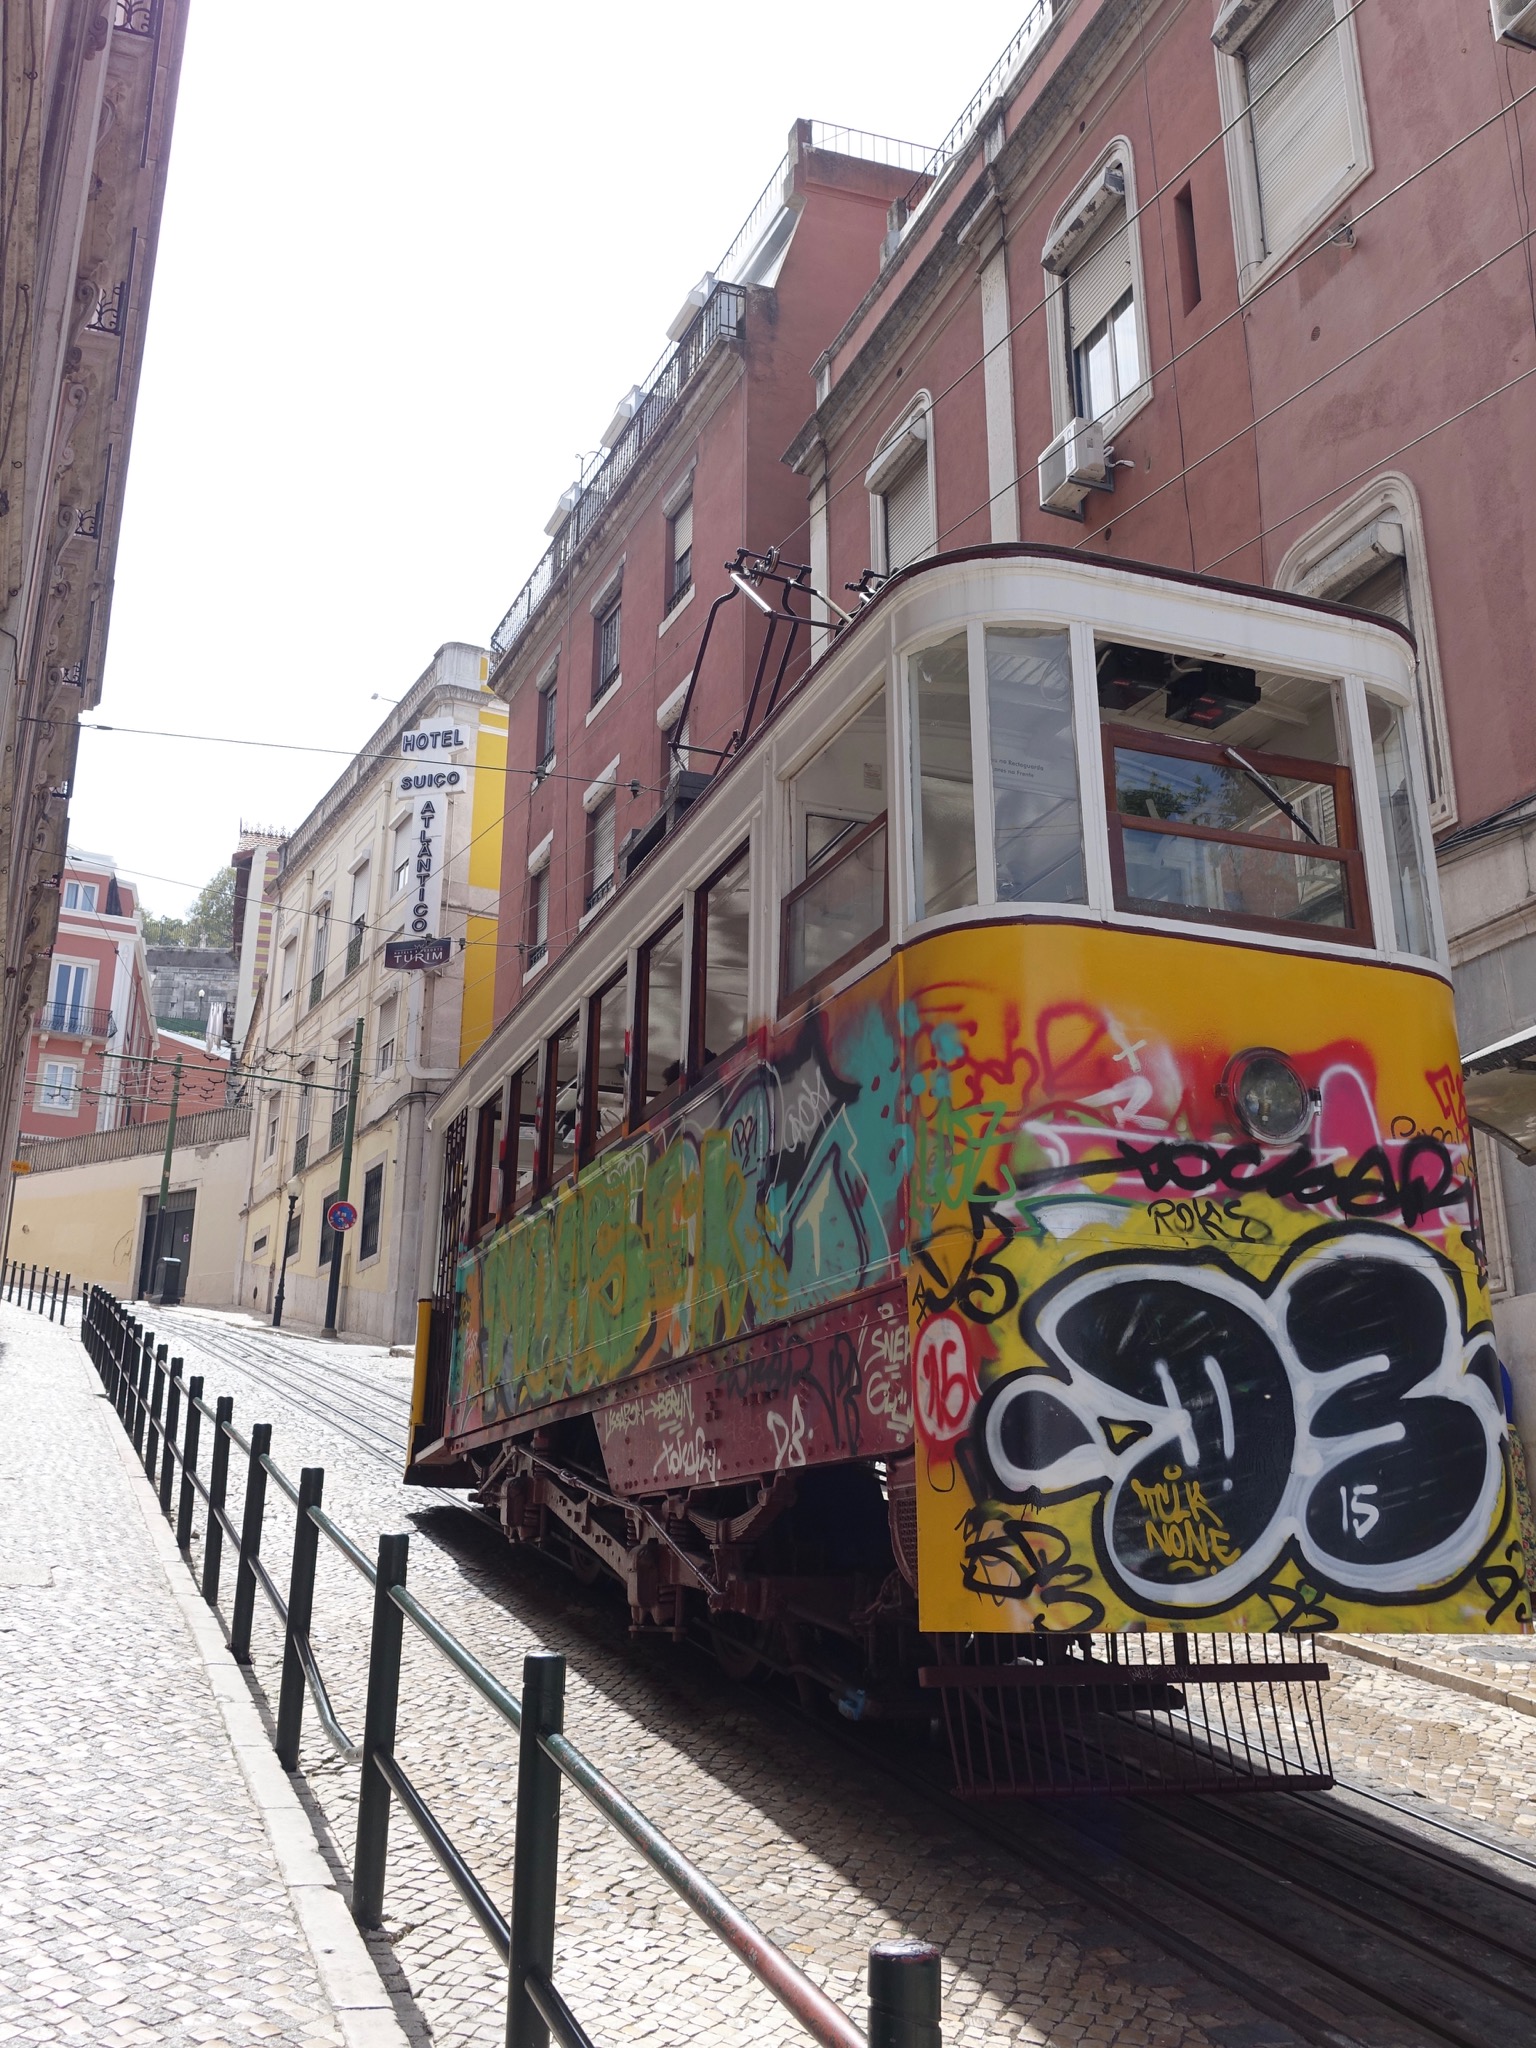 Photo 81 of 86 from the album Highlights Lisbon 2015.